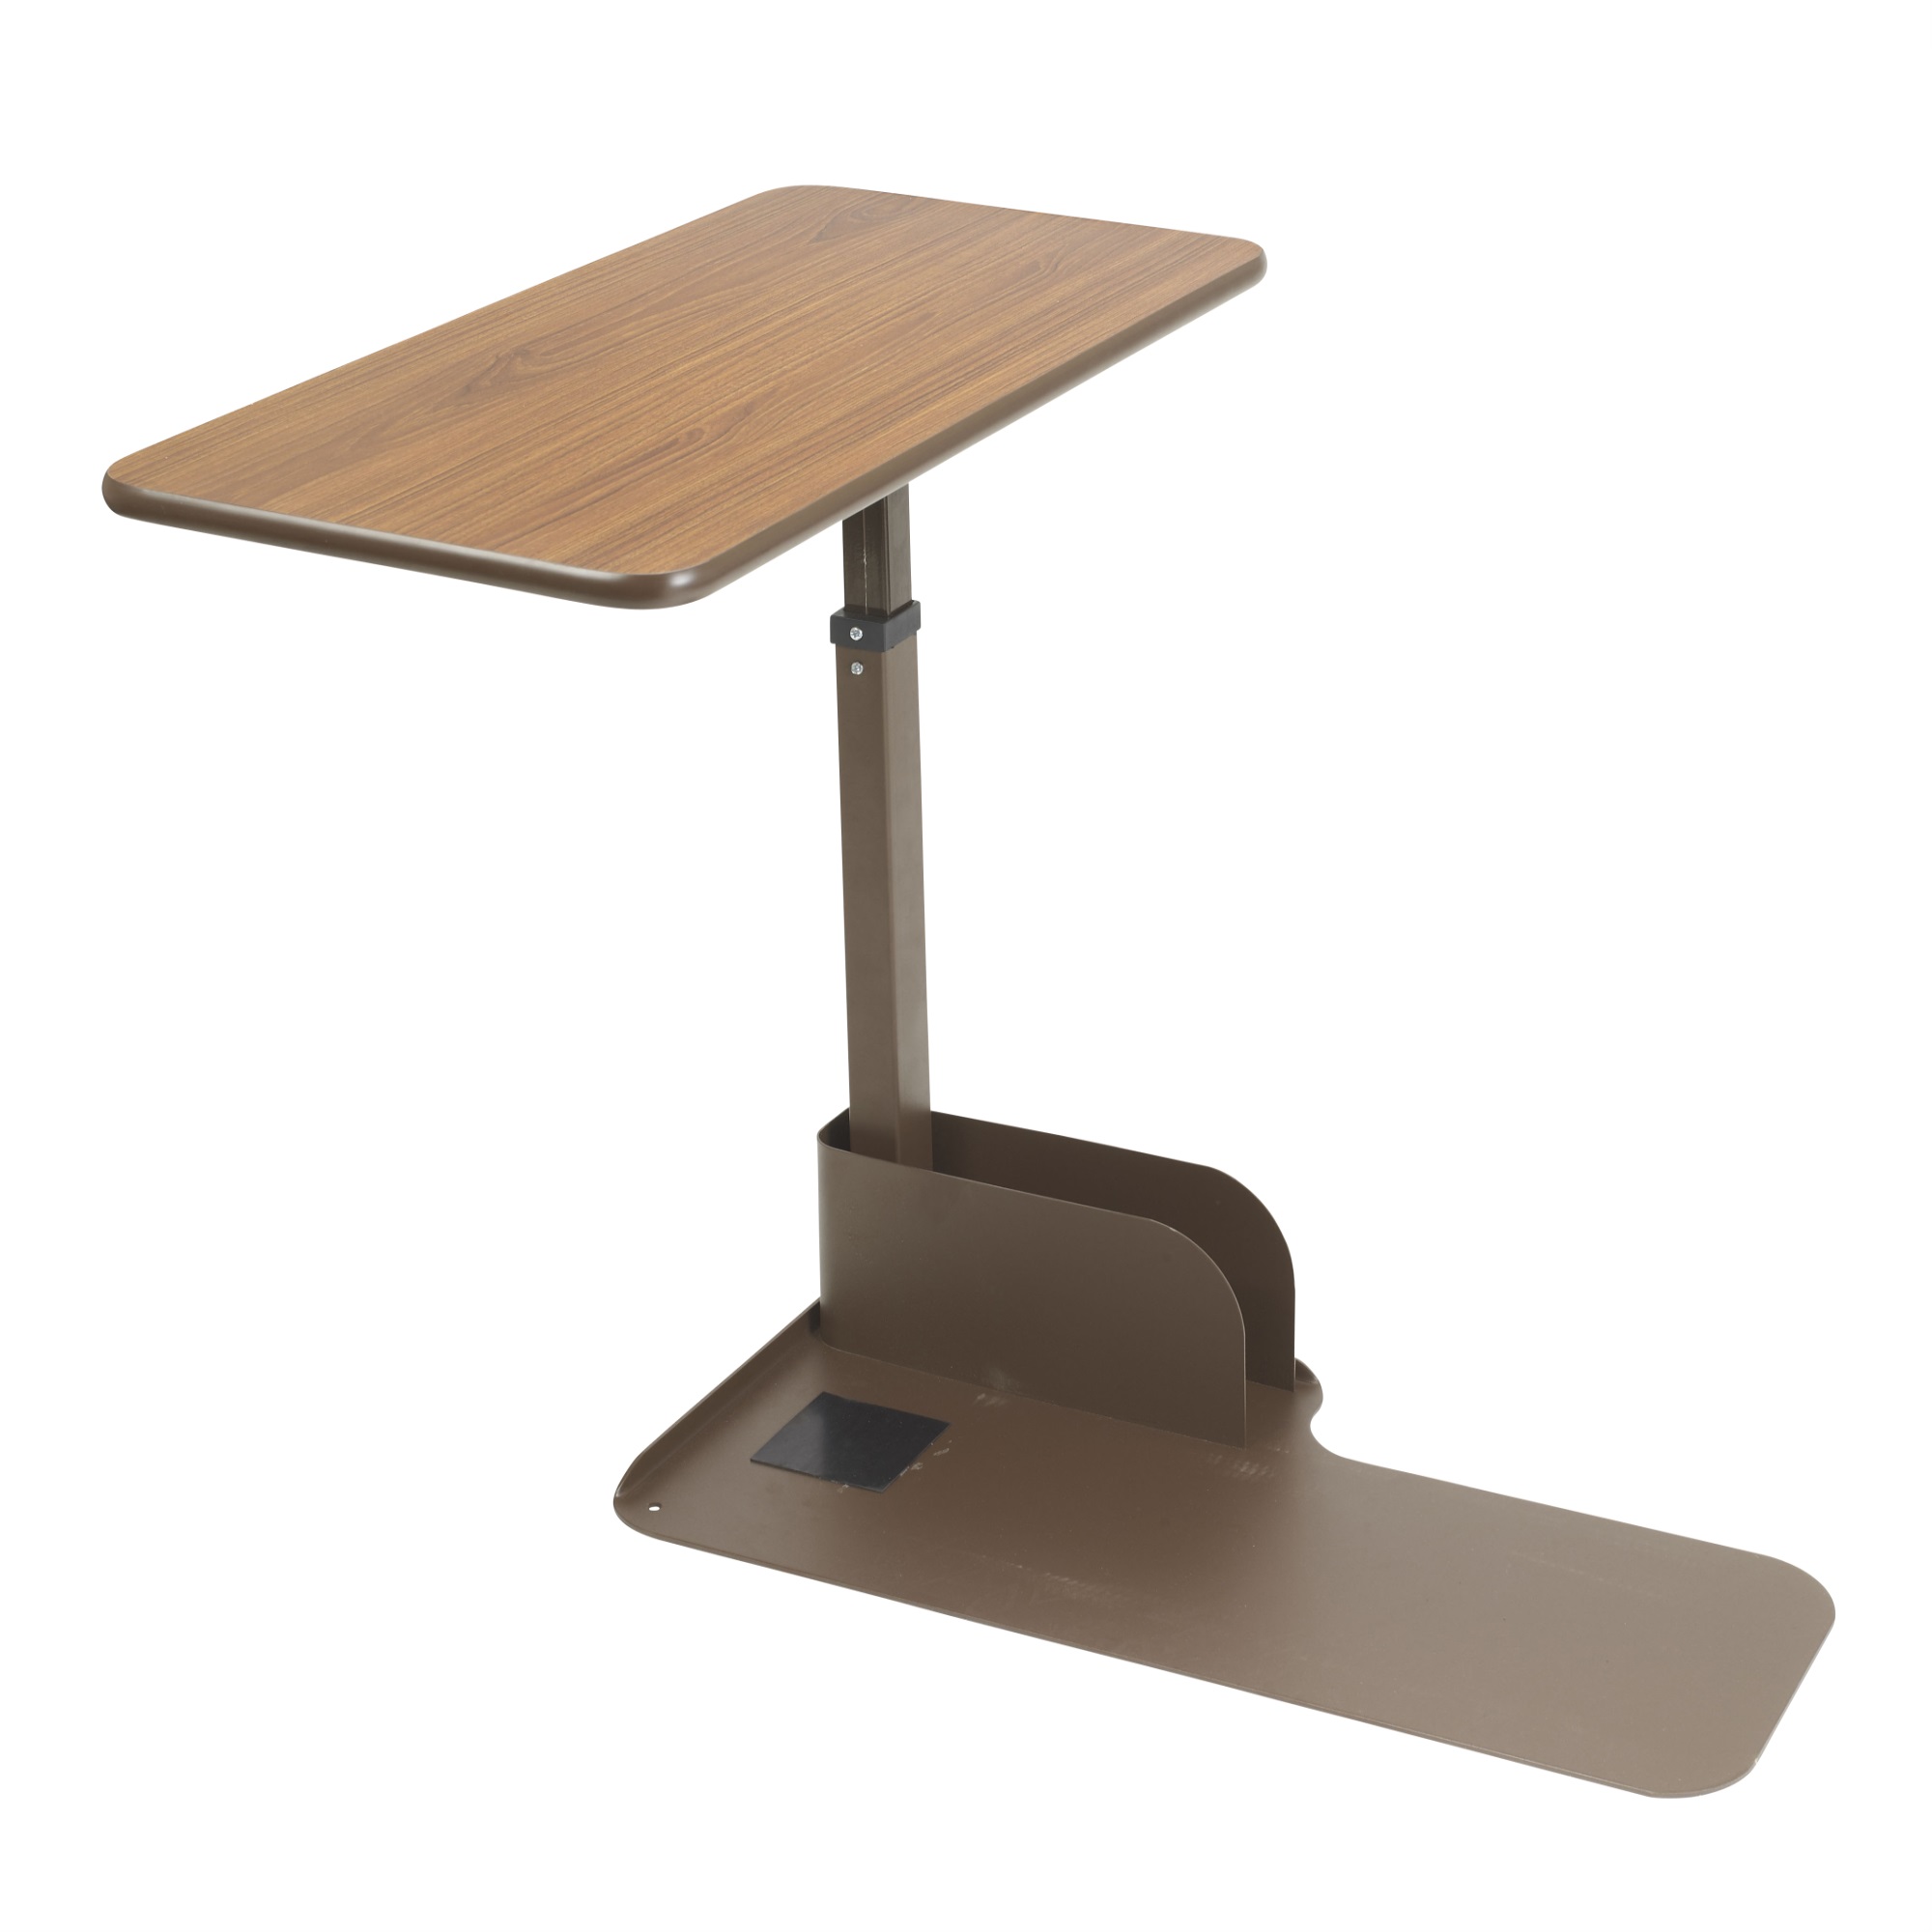 Drive Medical Seat Lift Chair Overbed Table, Right Side Table